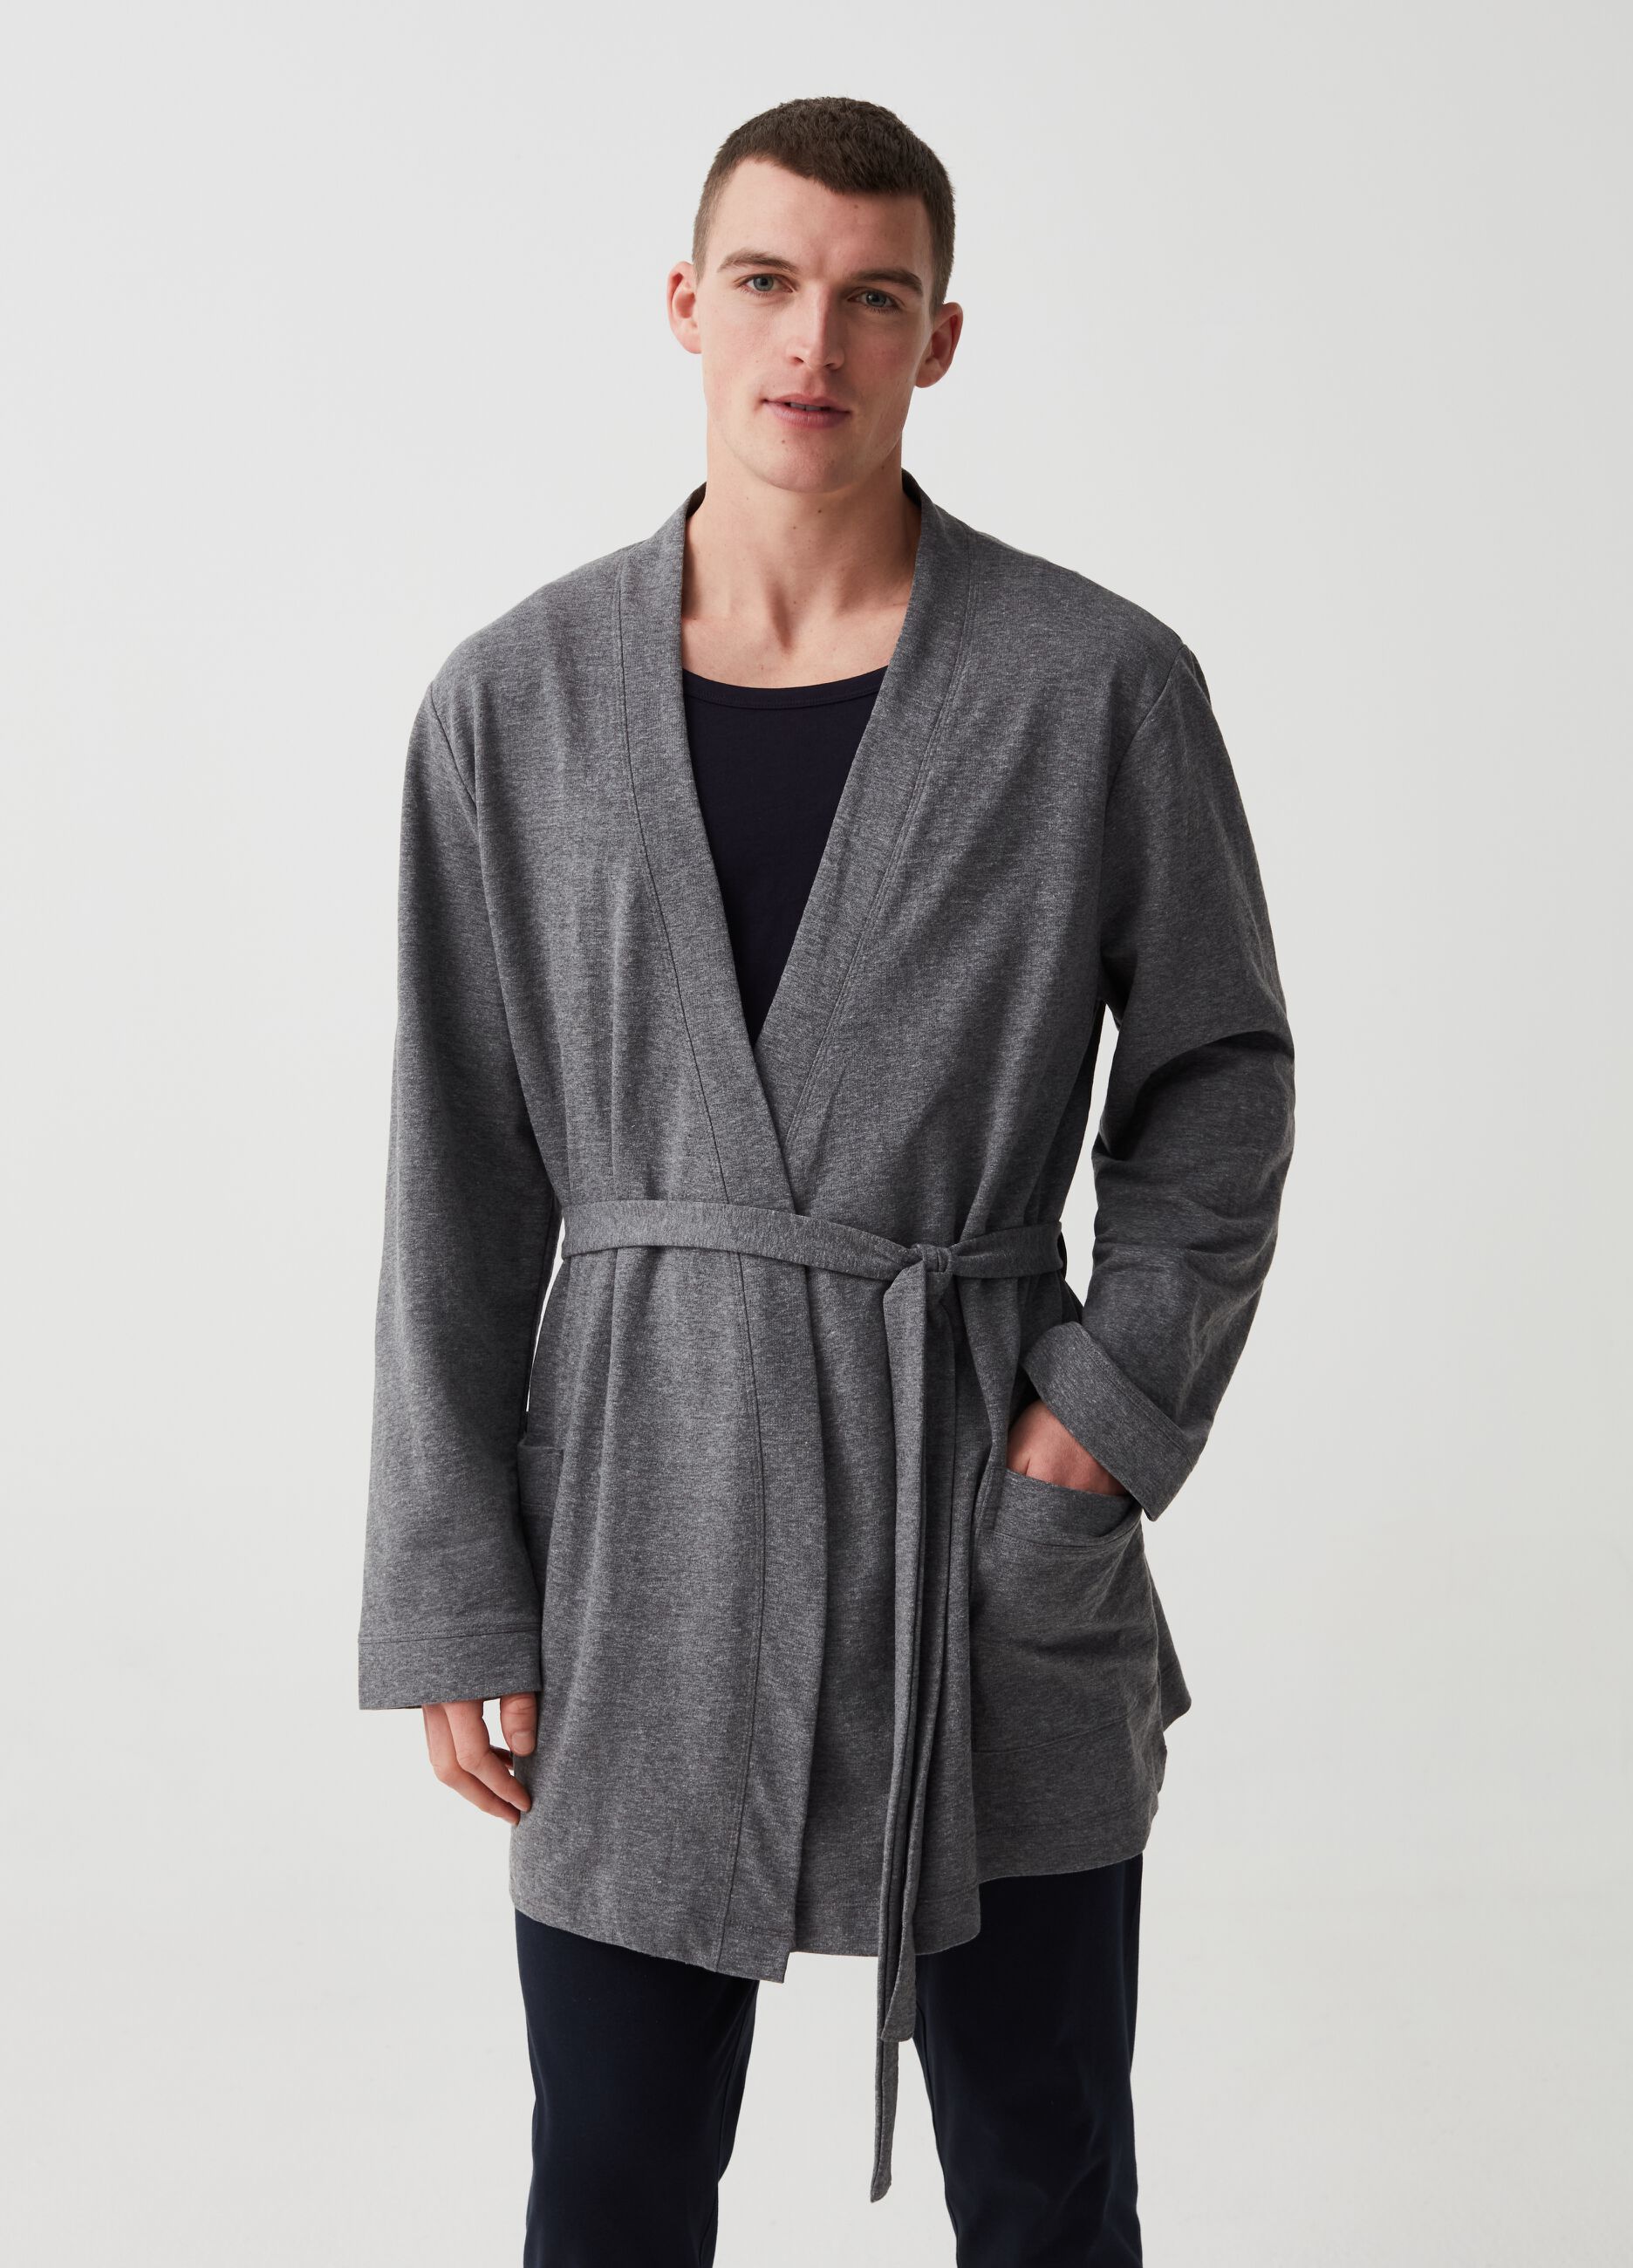 Short robe with pockets and belt